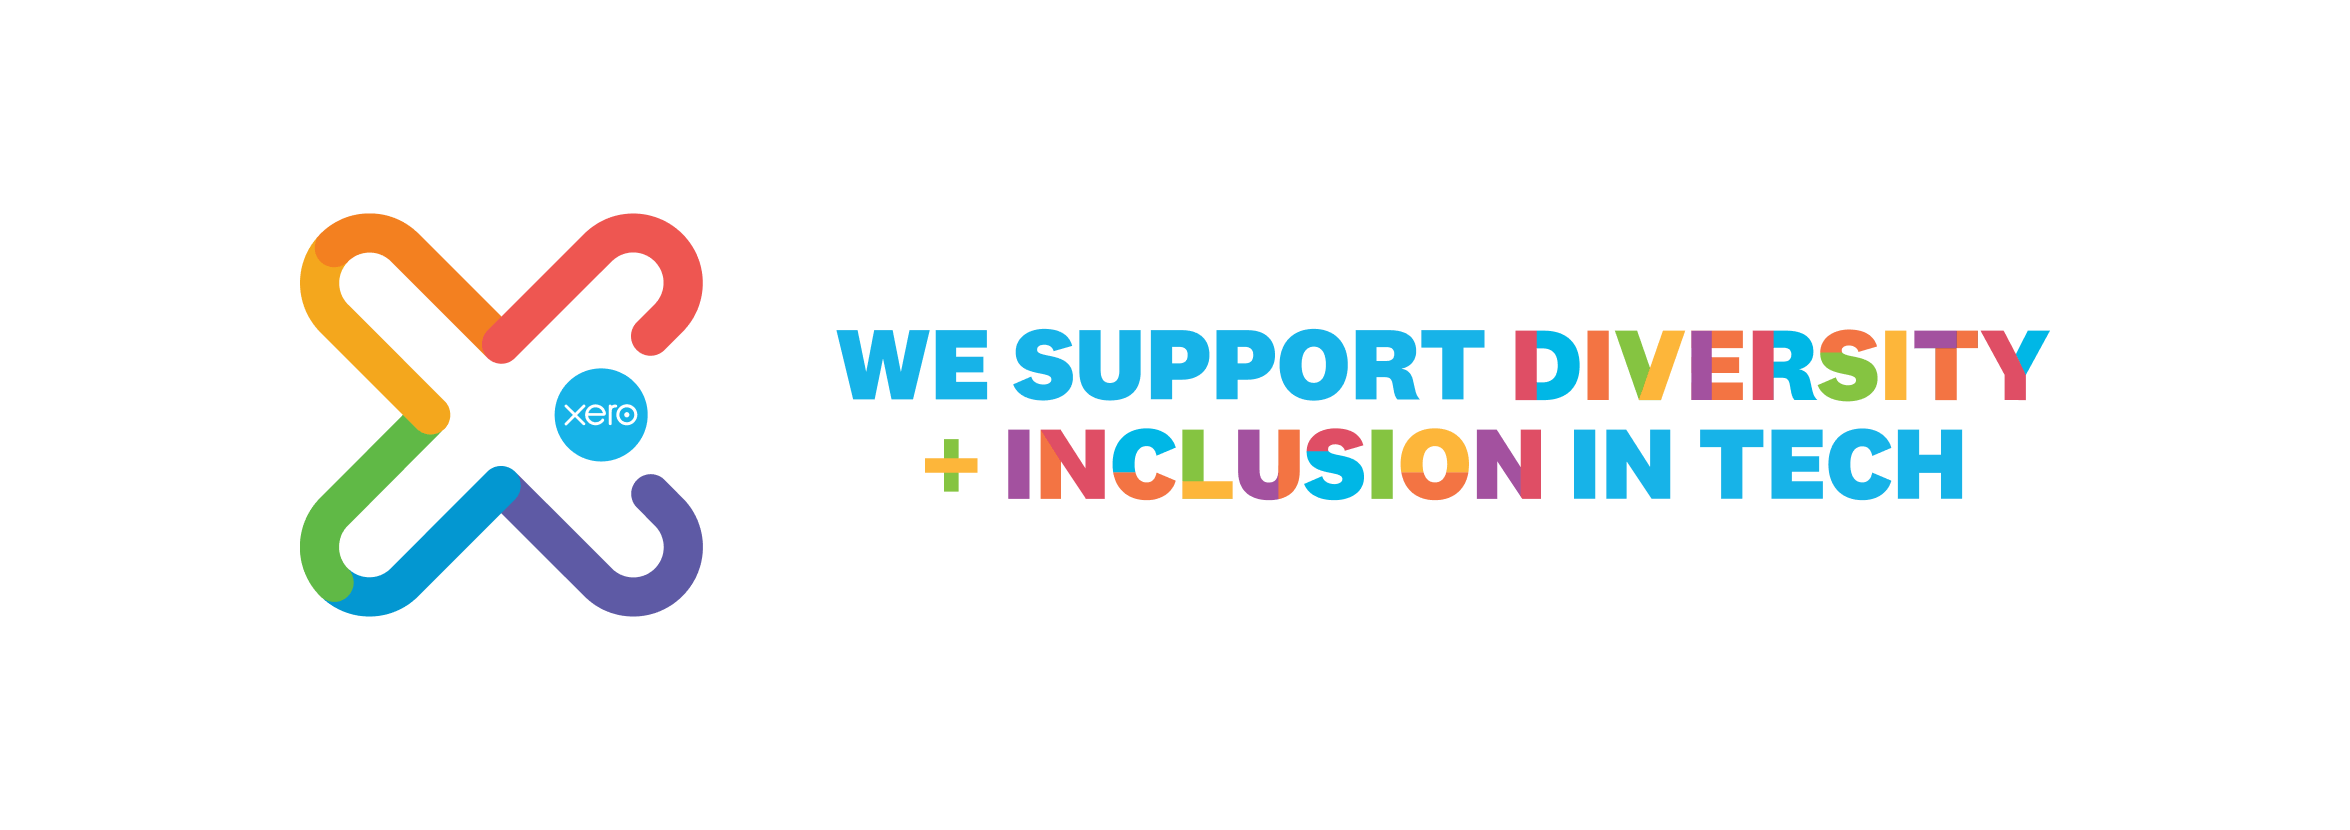 A rainbow image that includes  the Xero logo and says ‘We support diversity and inclusion in tech’. 